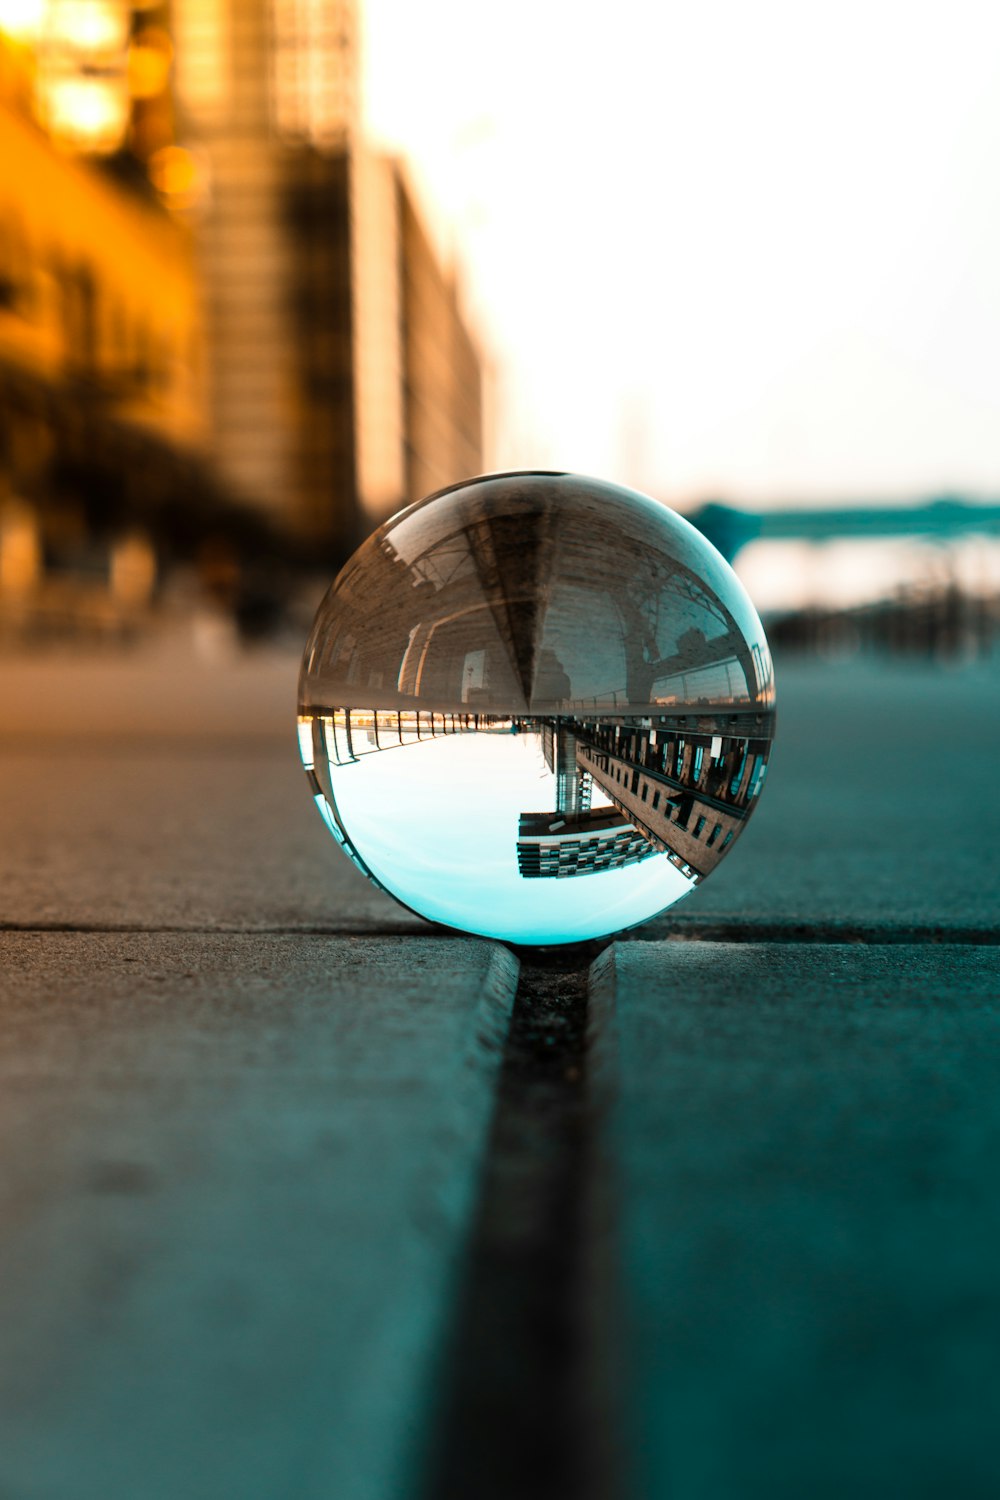 a glass ball sitting on the side of a road